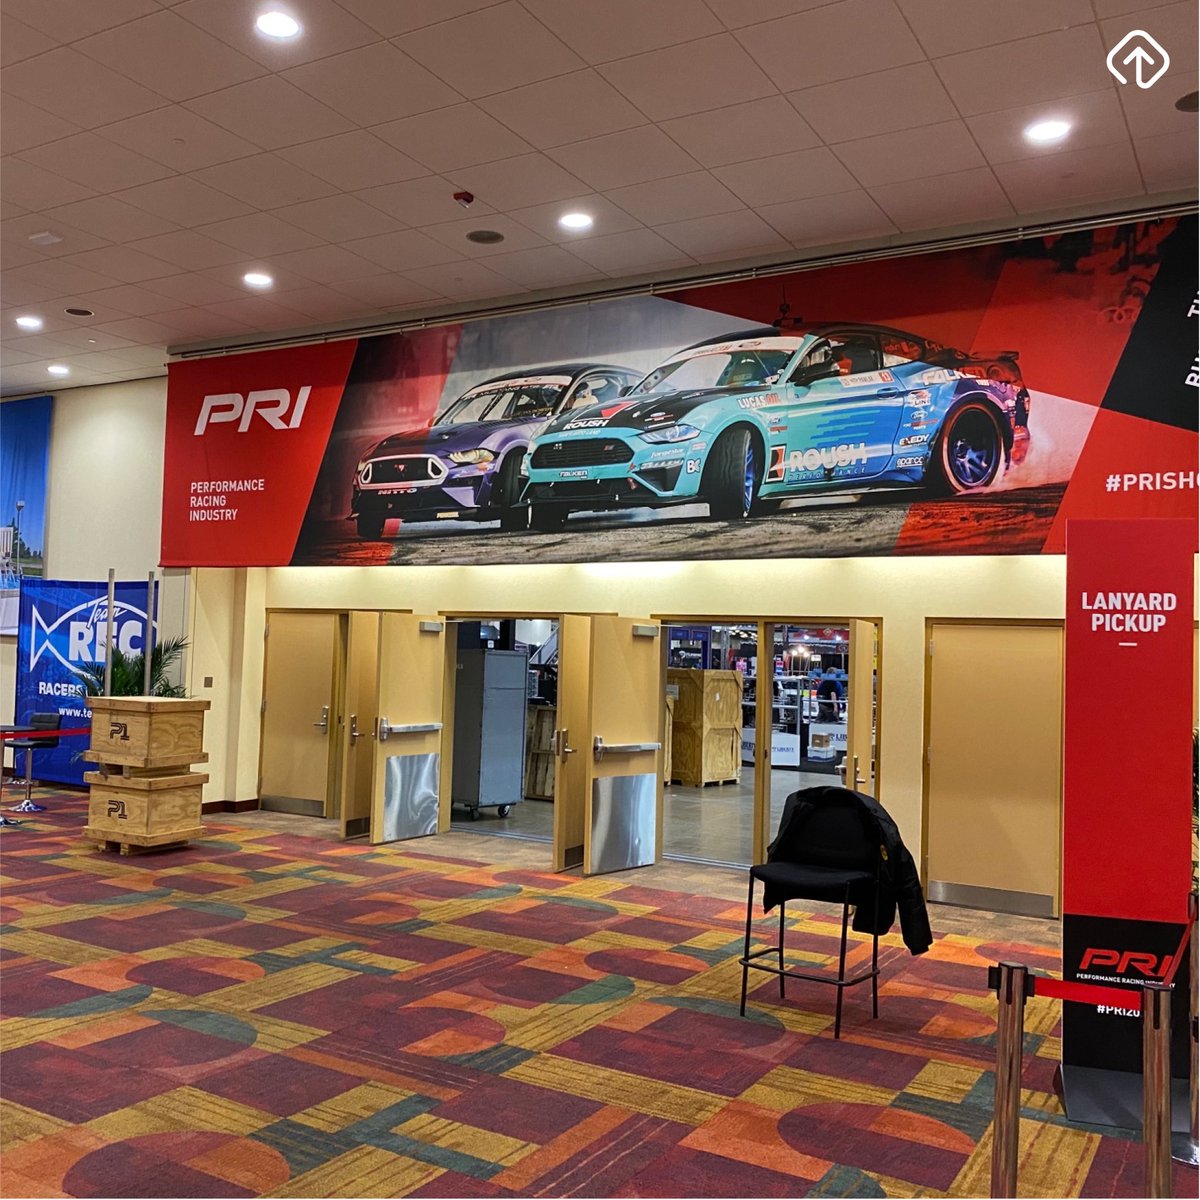 We're at the @prishow tomorrow December 8th through until Saturday December 10th!

Come by our booth 243 and discuss our products!

#prishow #racingindustry #prishow2022 #branding #surfturfshelters #popupshelter #popupcanopy #popupframe #popupshop #hamont